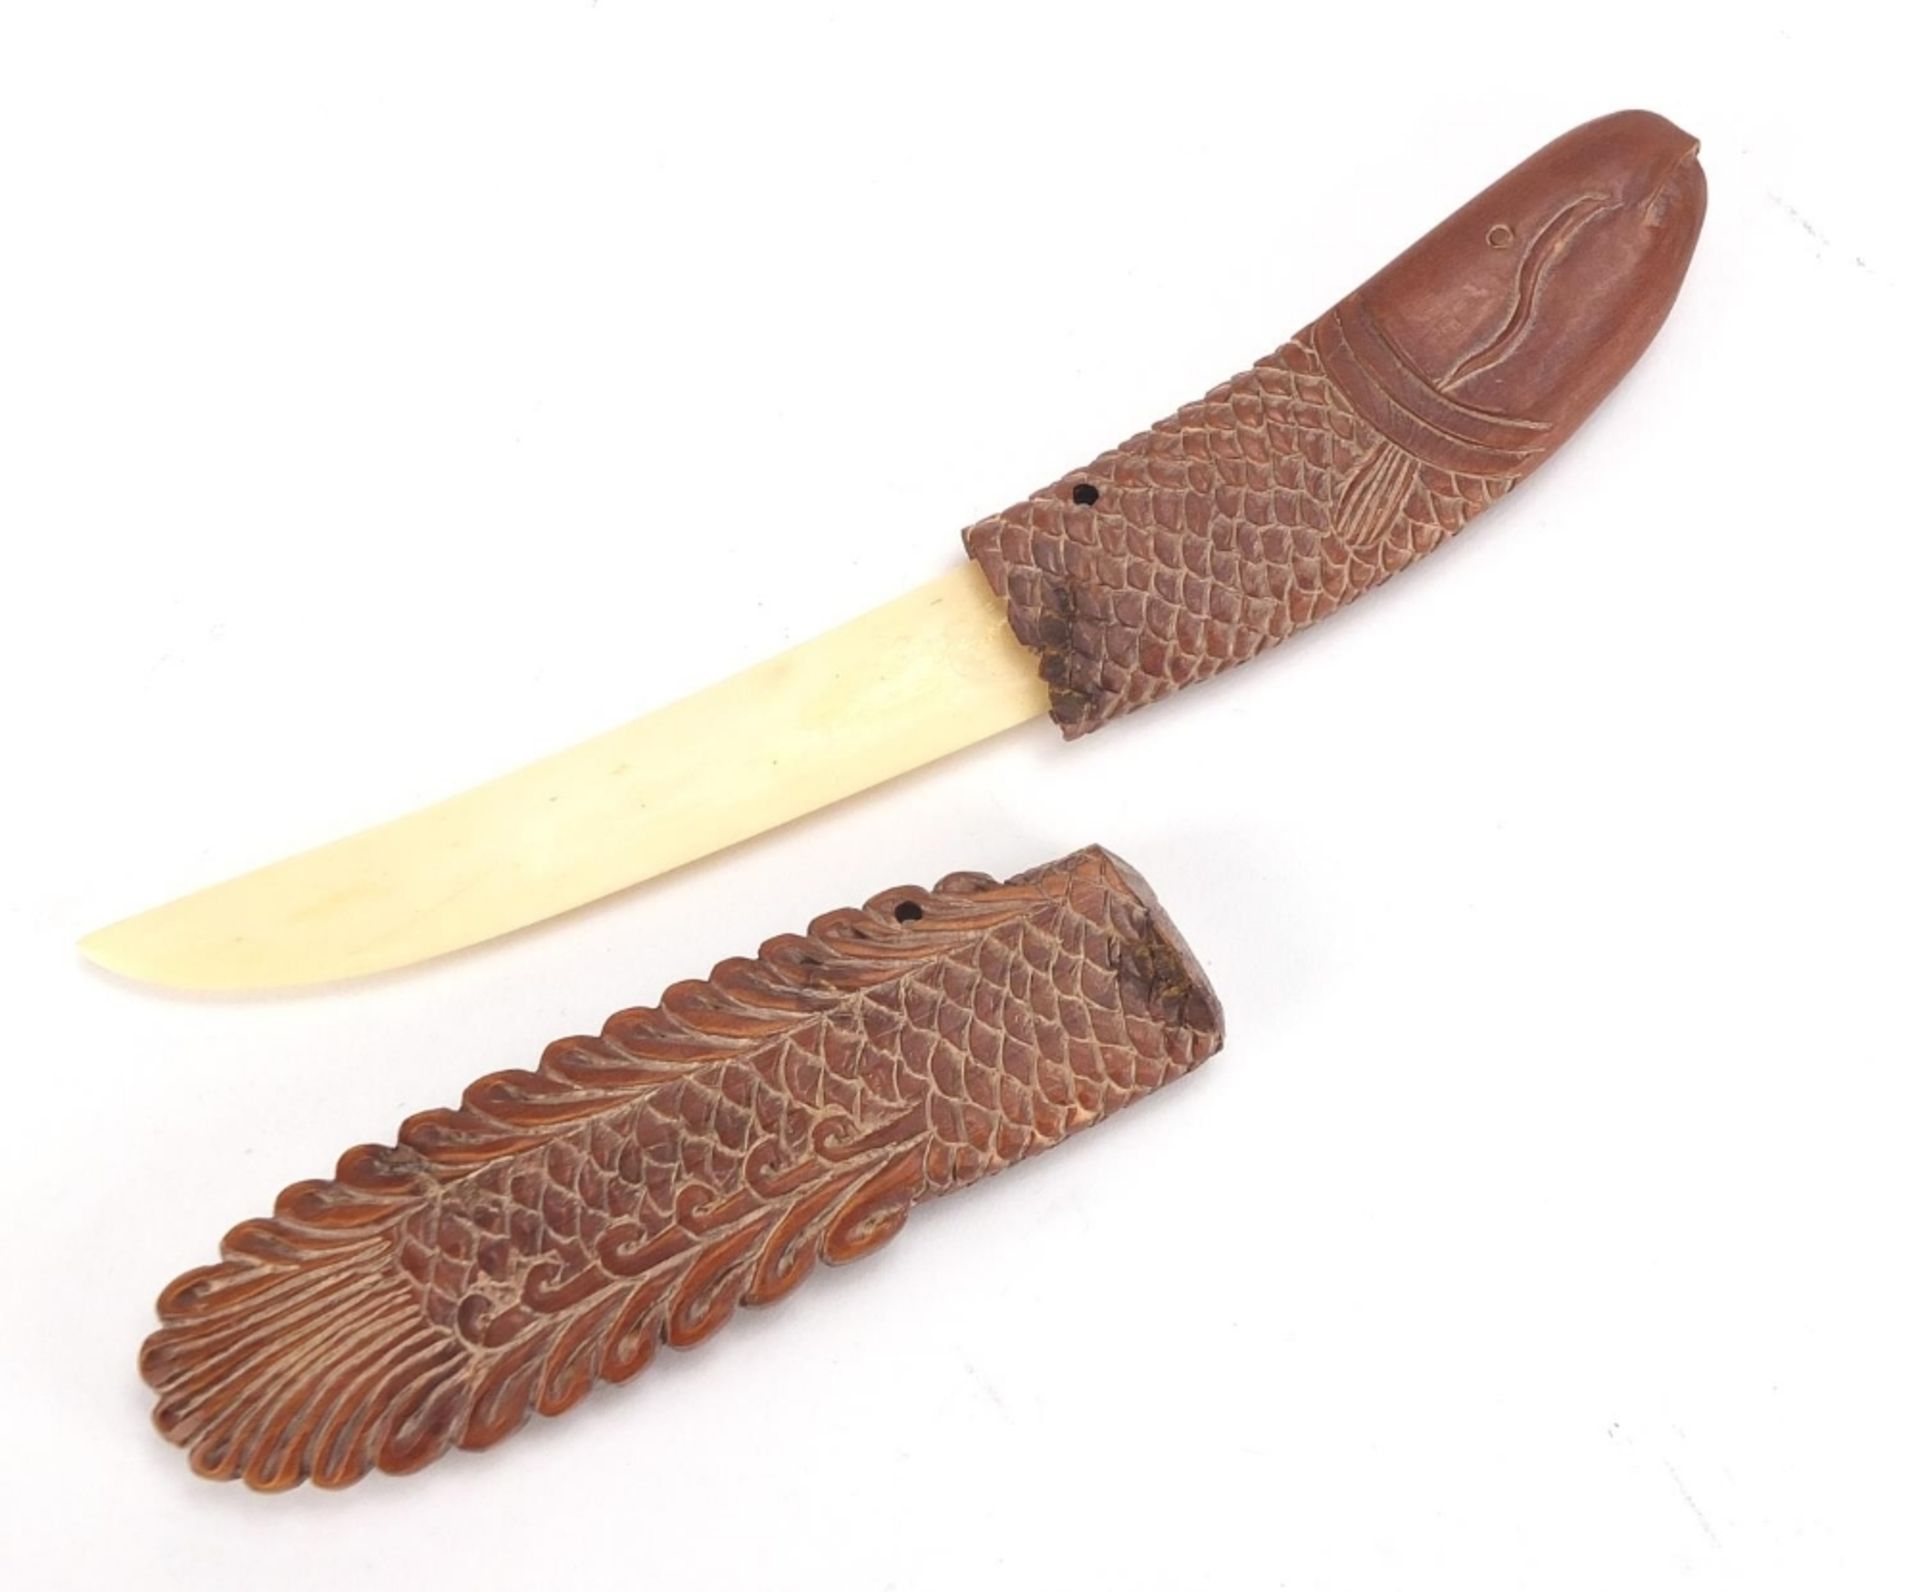 Scrimshaw style carved wood fish design knife with bone blade, 18cm in length : For Further